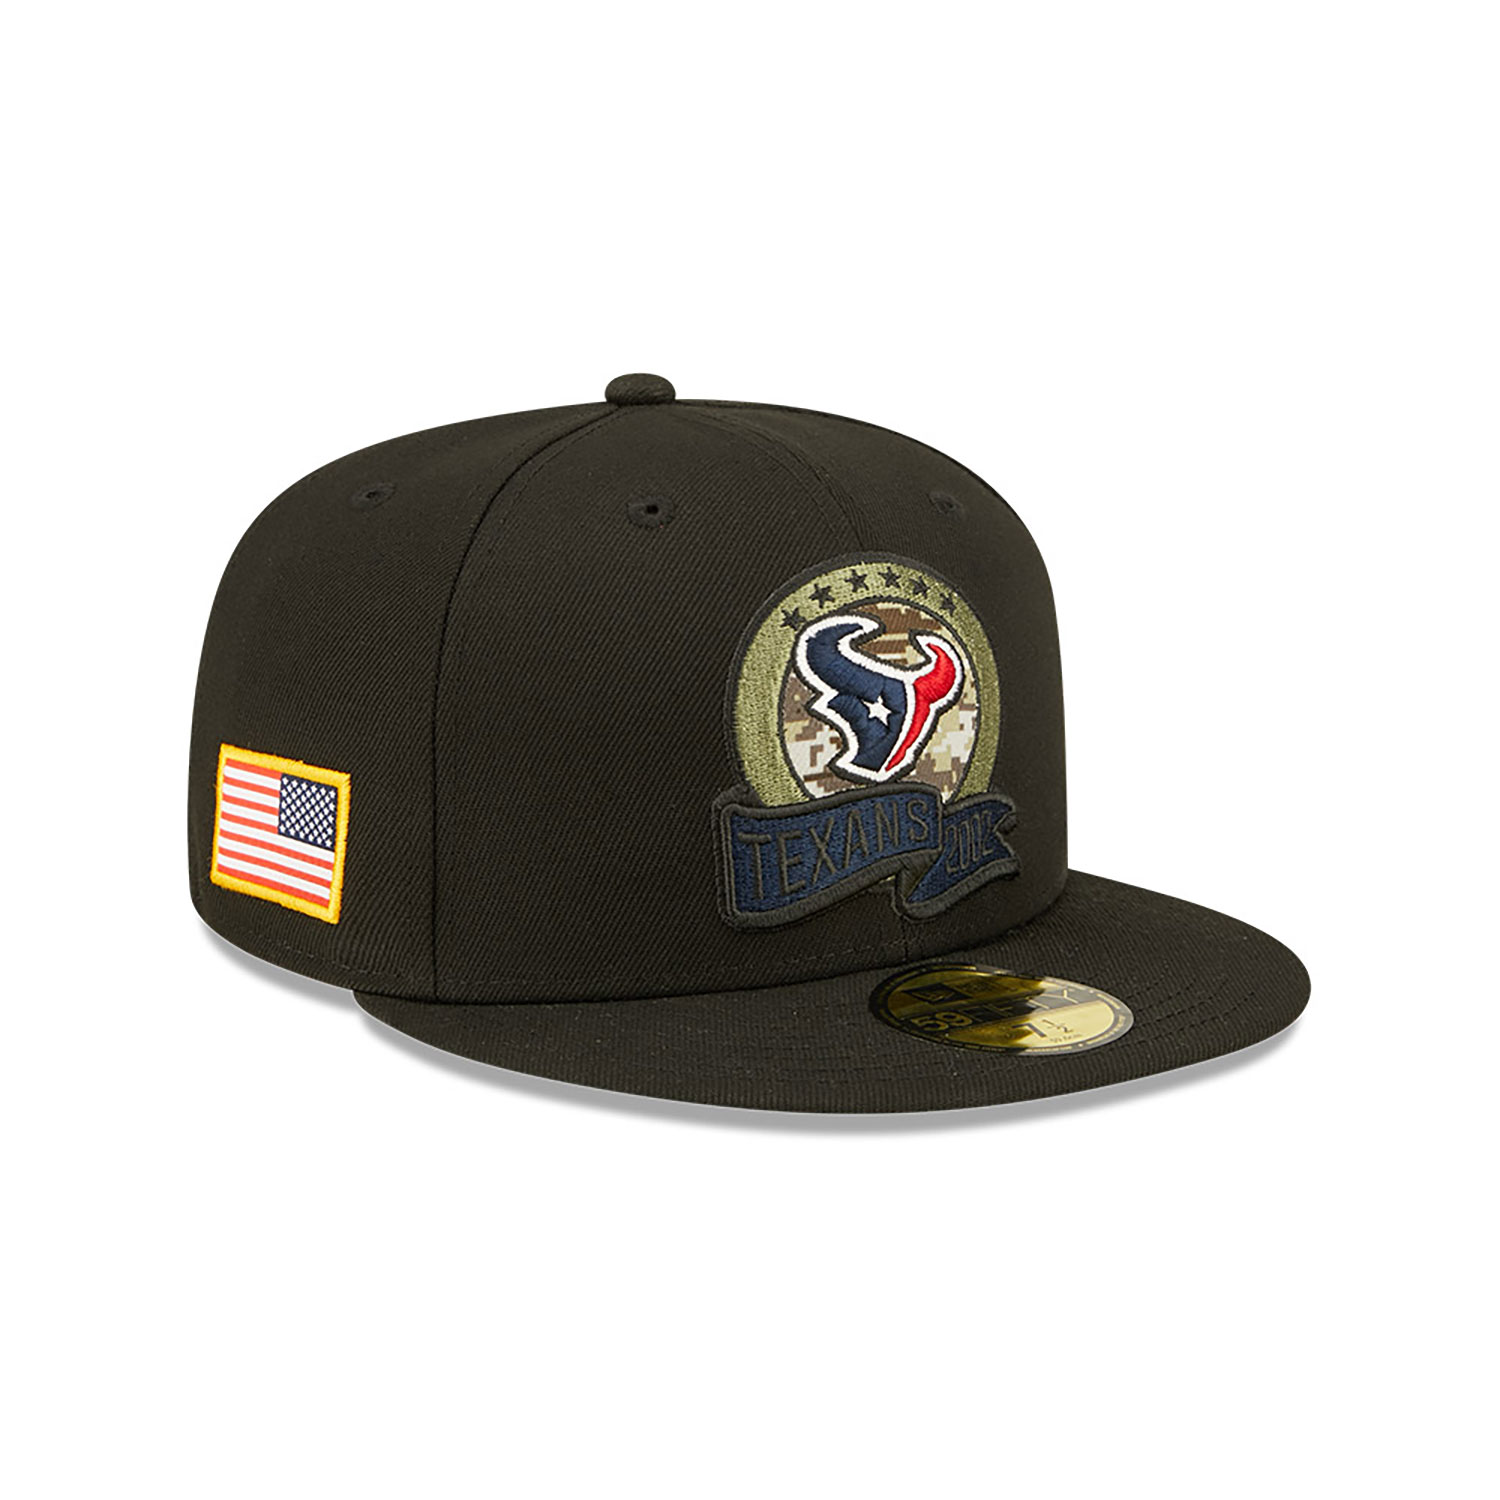 New Era Houston Texans Salute to Service 59Fifty Camo Hat Cap Fitted ...